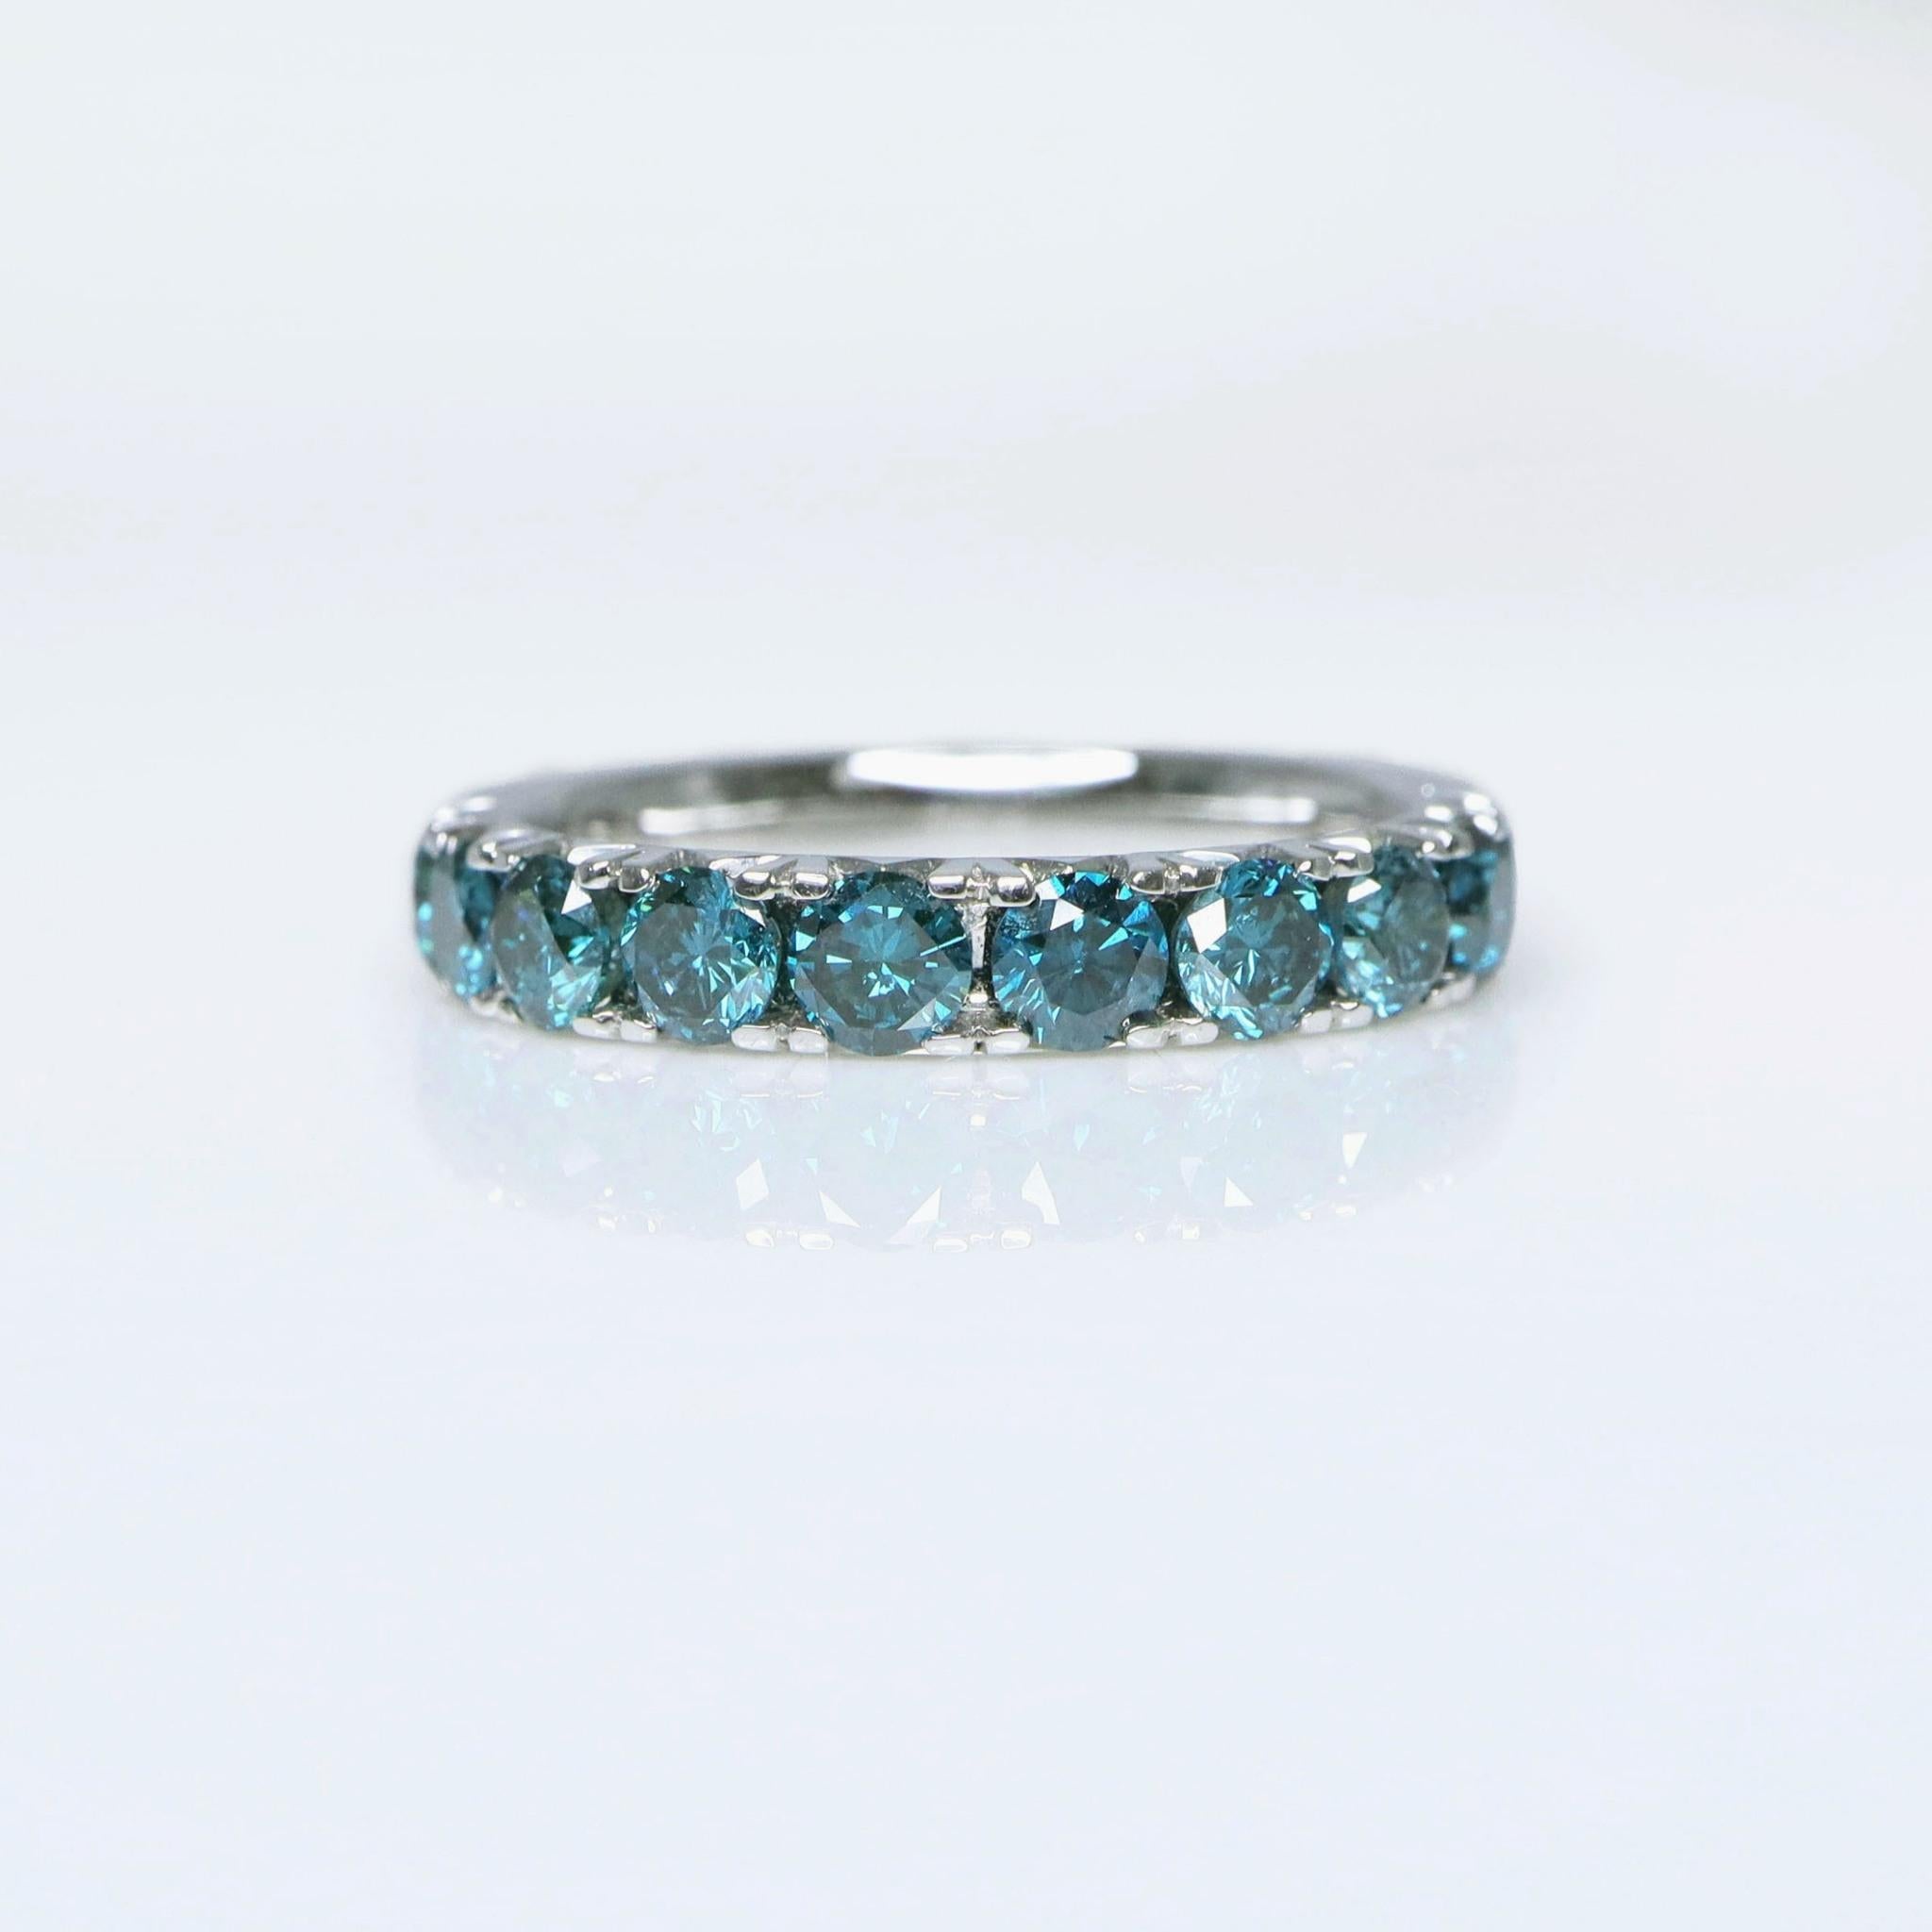 *IGI 14k 1.30 Ct Natural Blue Diamonds Eternity  Engagement Ring*
14K white gold eternity band set with 10 pieces of IGI-certified natural blue diamonds weighing 1.30 ct.

Unique swallow shape design on the side.

Main Stone
Variety: Natural